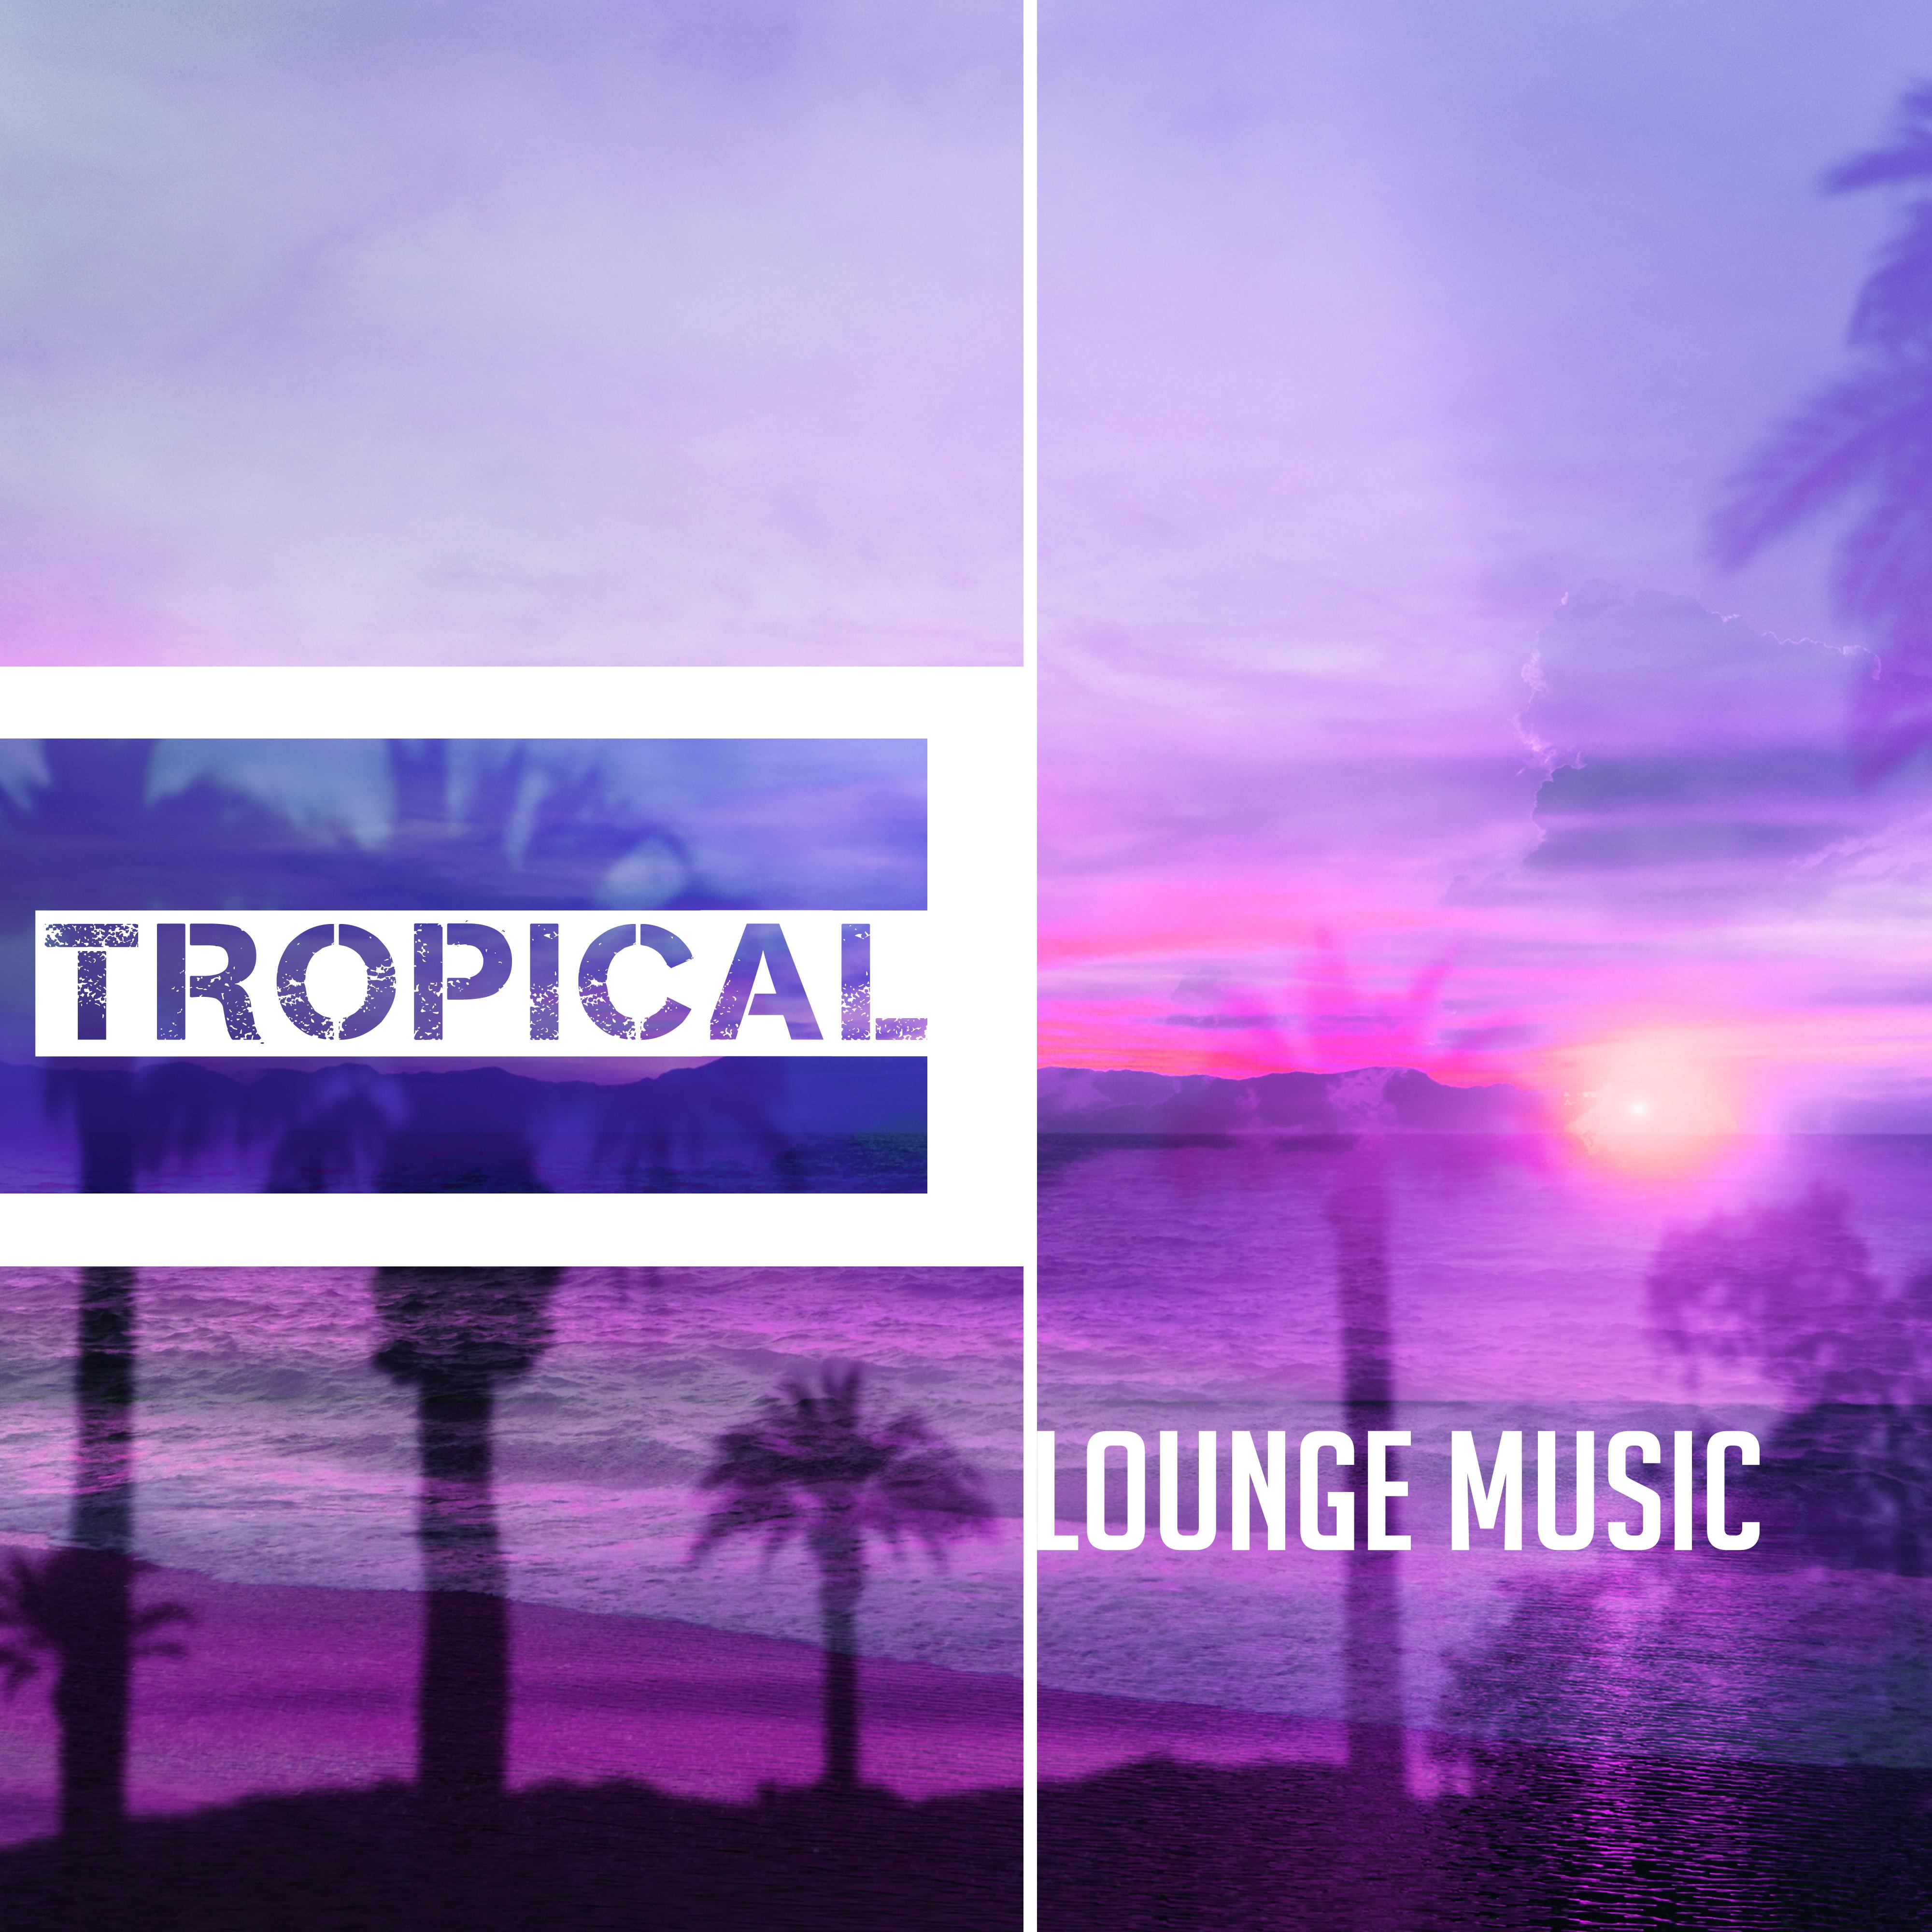 Tropical Lounge Music – Ambient Summer, Ibiza 2017, Relax, Beach Chill, Bar Chill Out, Deep Rest